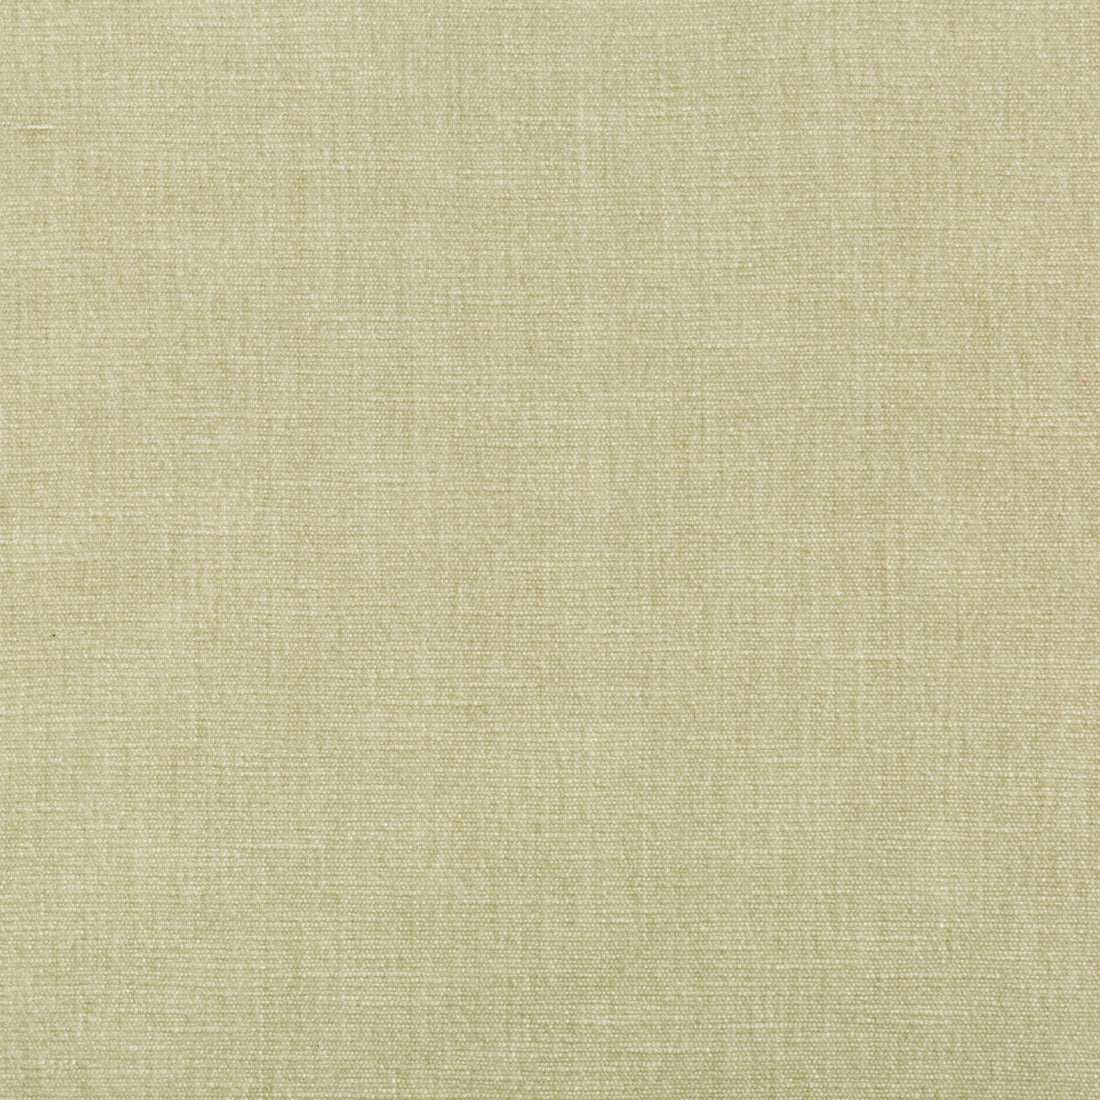 Kravet Smart fabric in 36076-1611 color - pattern 36076.1611.0 - by Kravet Smart in the Sumptuous Chenille II collection